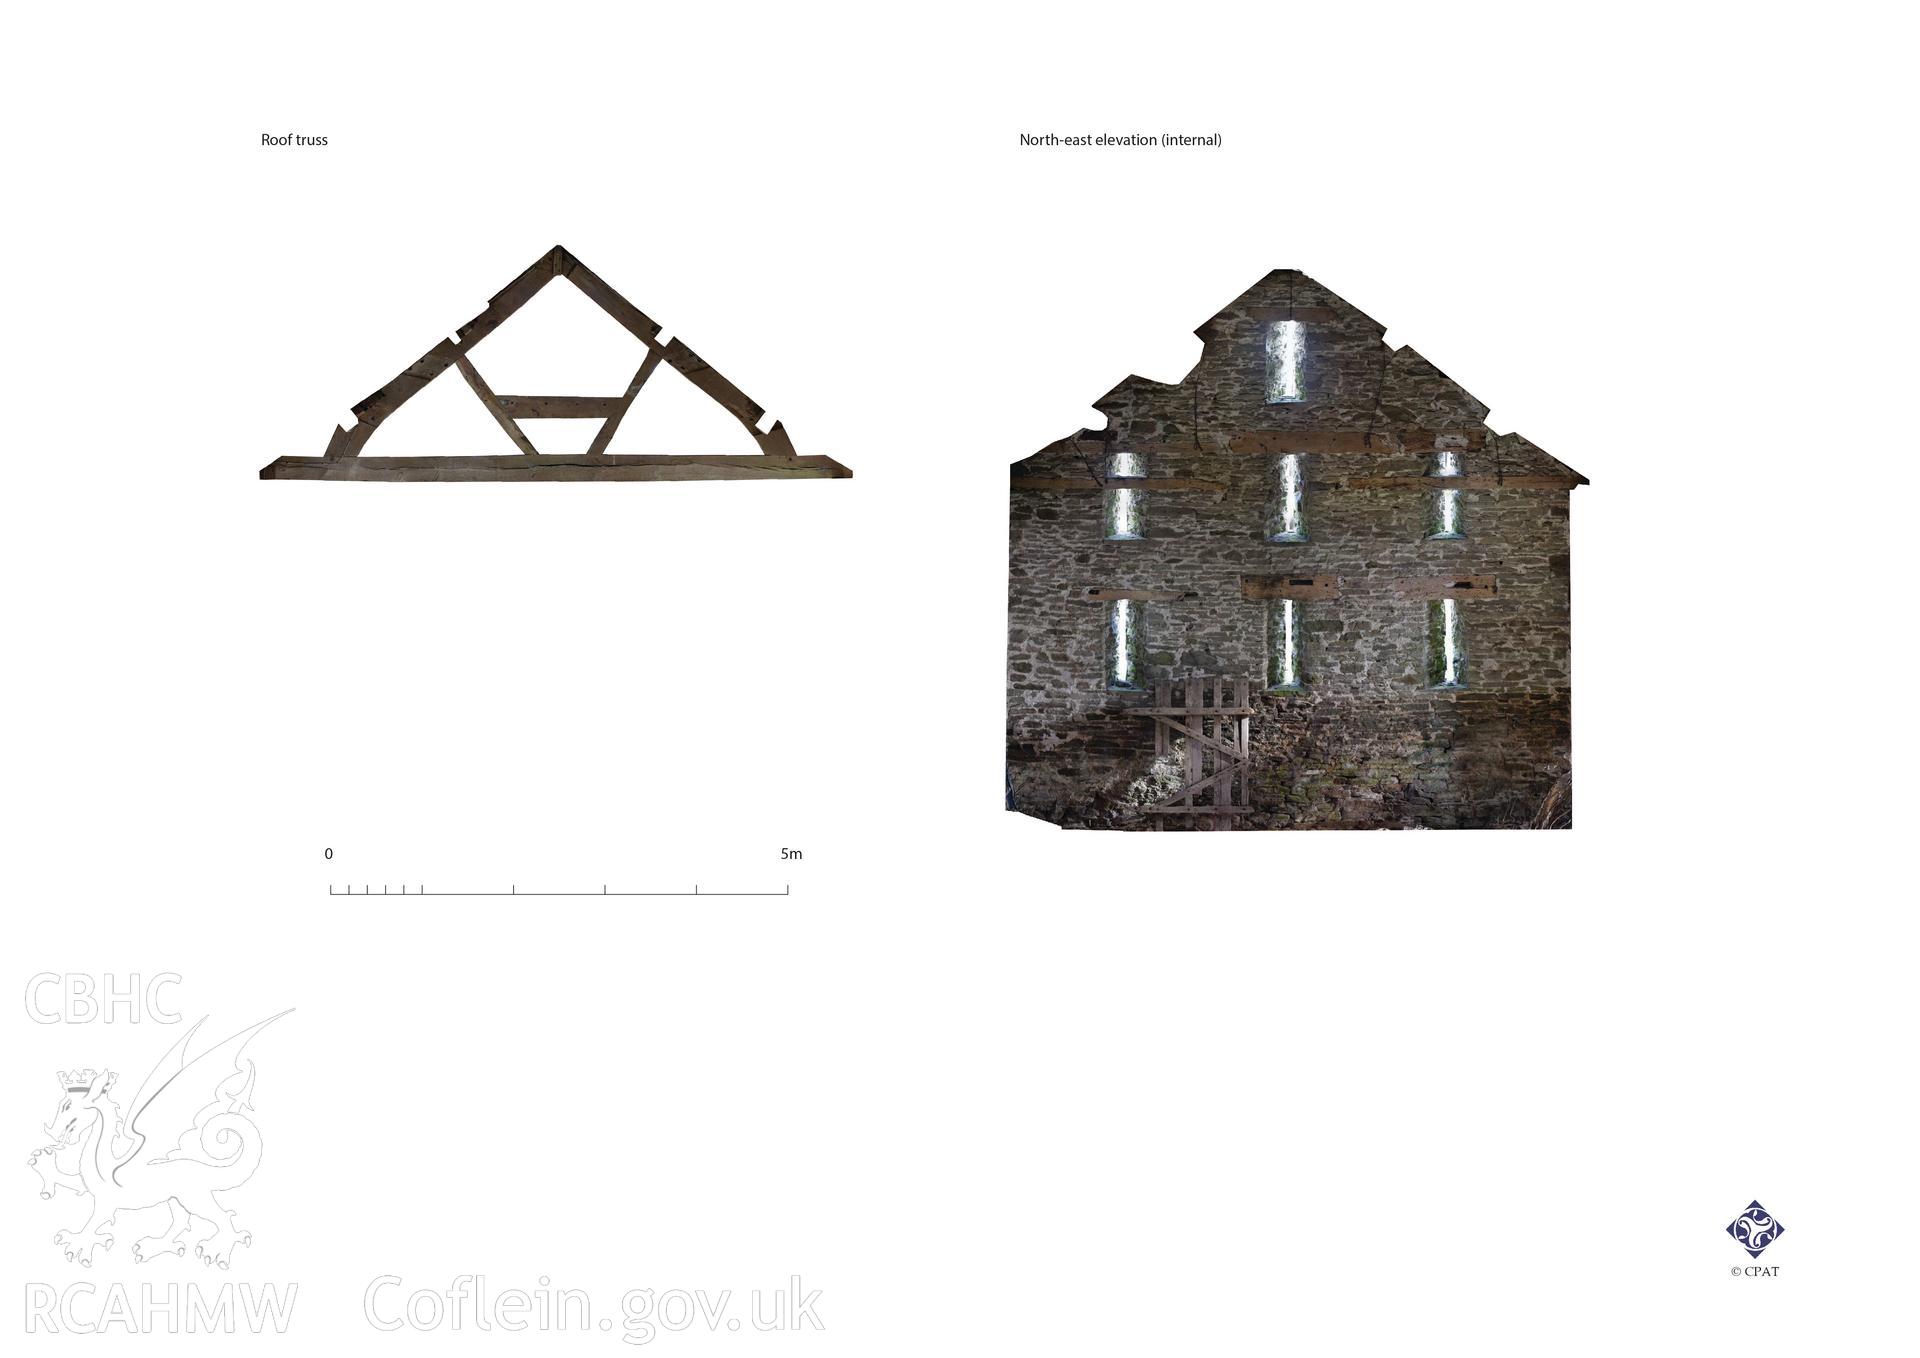 Report illustration labelled 'barn internal' relating to CPAT Project 2355: Little Lloyney Farm, Clyro, Powys, 2019. Prepared by Will Logan of Clwyd Powys Archaeological Trust. Project no. 2355. HER event PRN: 140287. Planning application no. 18/0506/FUL.